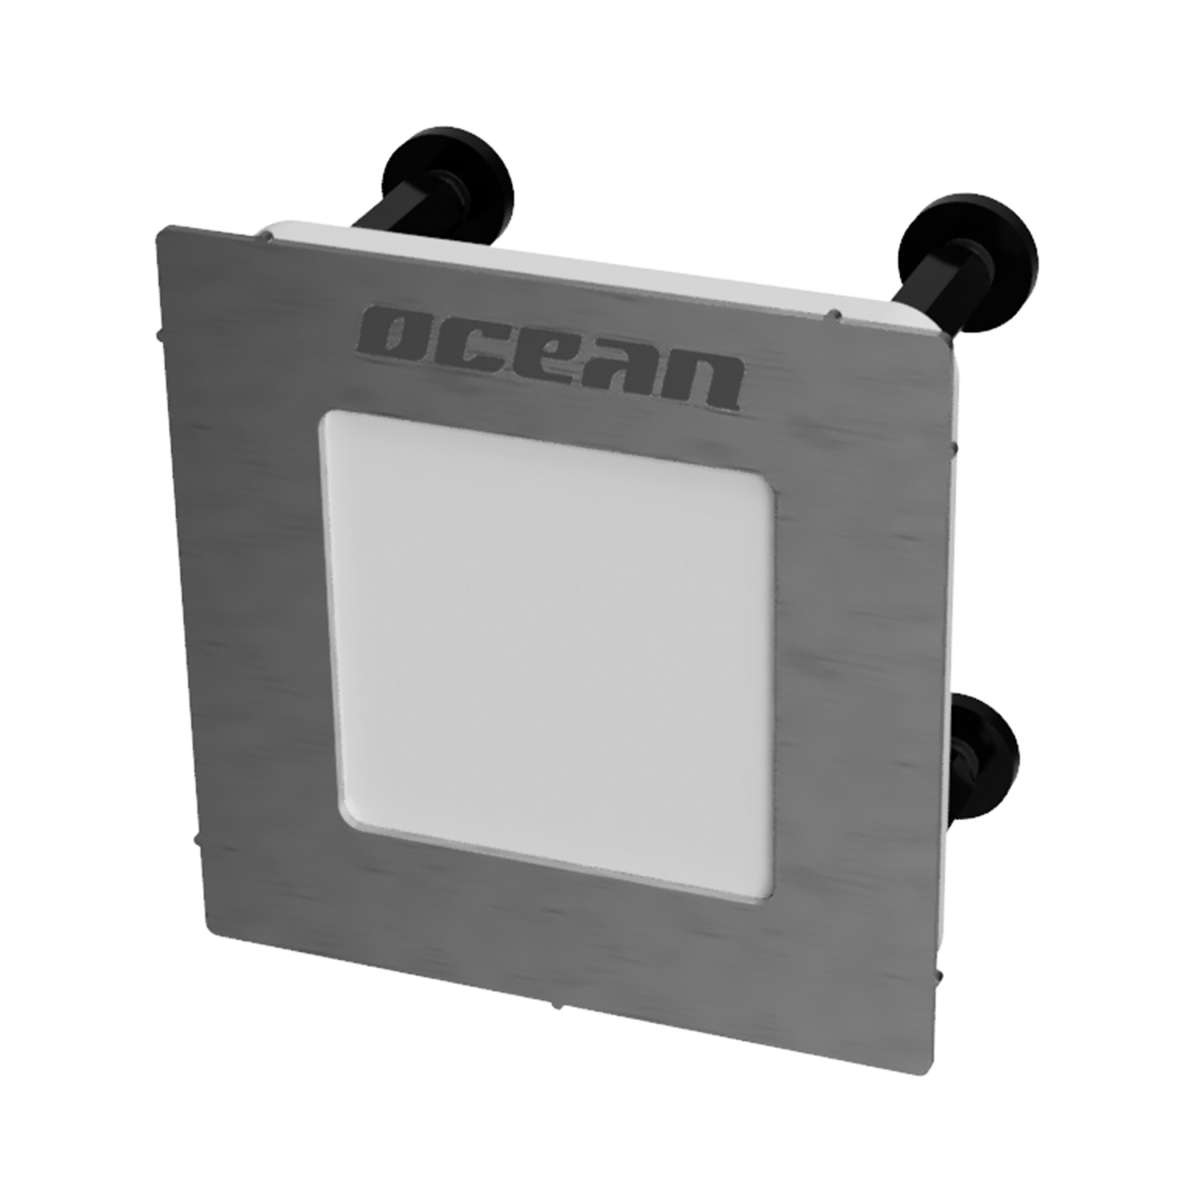 Ocean® under water light complete set „Square“, V4A, brushed, 110x110, for liner-, concrete-, tile and stainless steel pools, RGBW LED, approx. 2500 lumen, incl. 15m cable, inkl. flange set Ocean® under water light complete set „Square“, V4A, brushed, 110x110, for liner-, concrete-, tile and stainless steel pools, RGBW LED, approx. 2500 lumen, incl. 15m cable, inkl. flange set